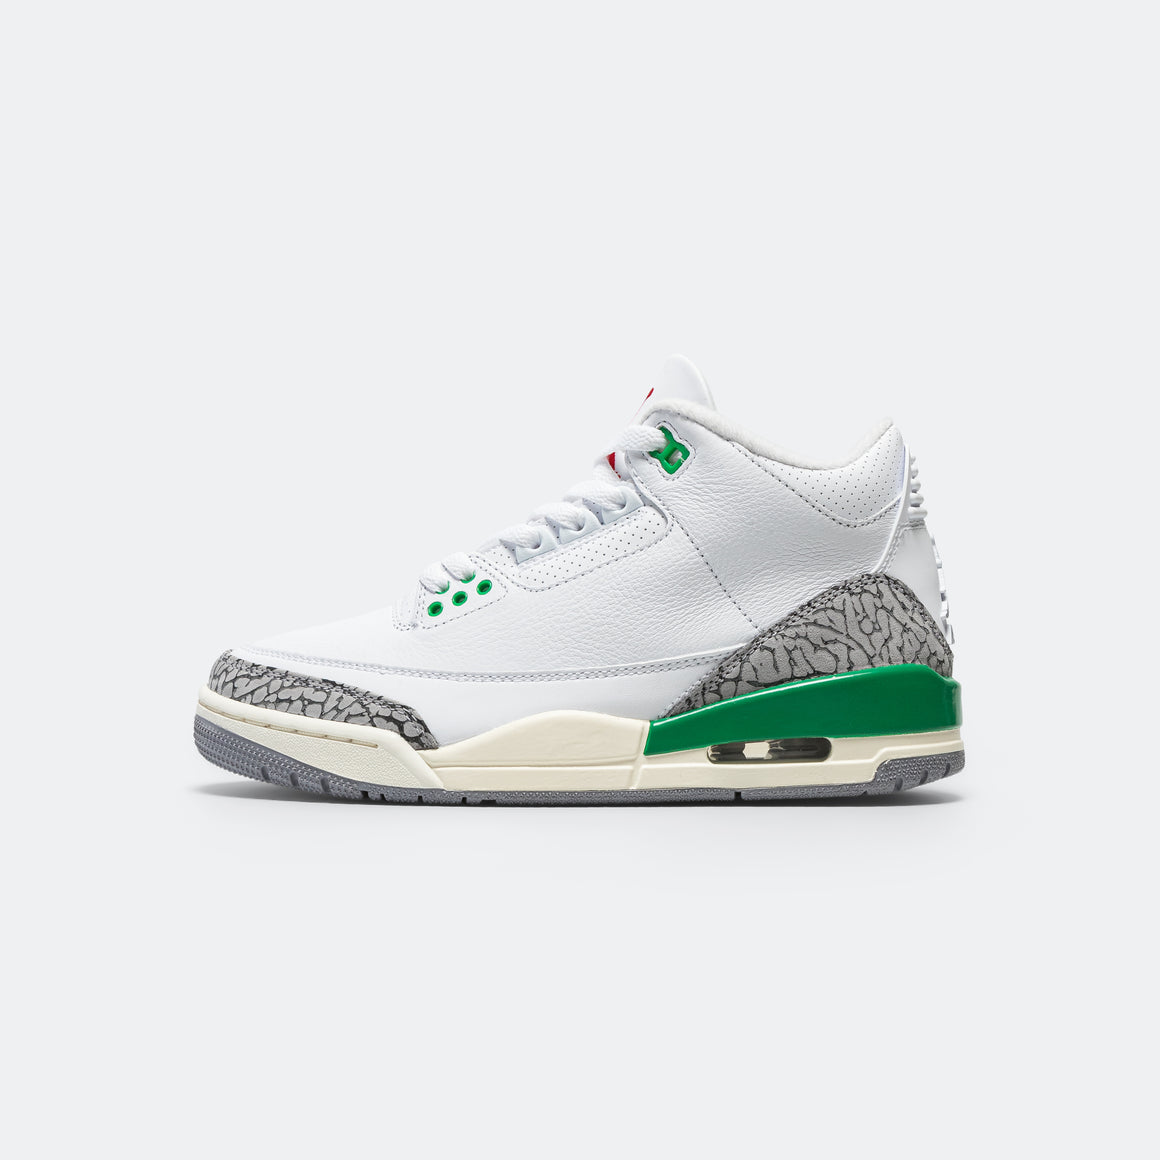 Nike Womens Air Jordan Retro 3 - White/Varsity Red-Lucky Green | Up There